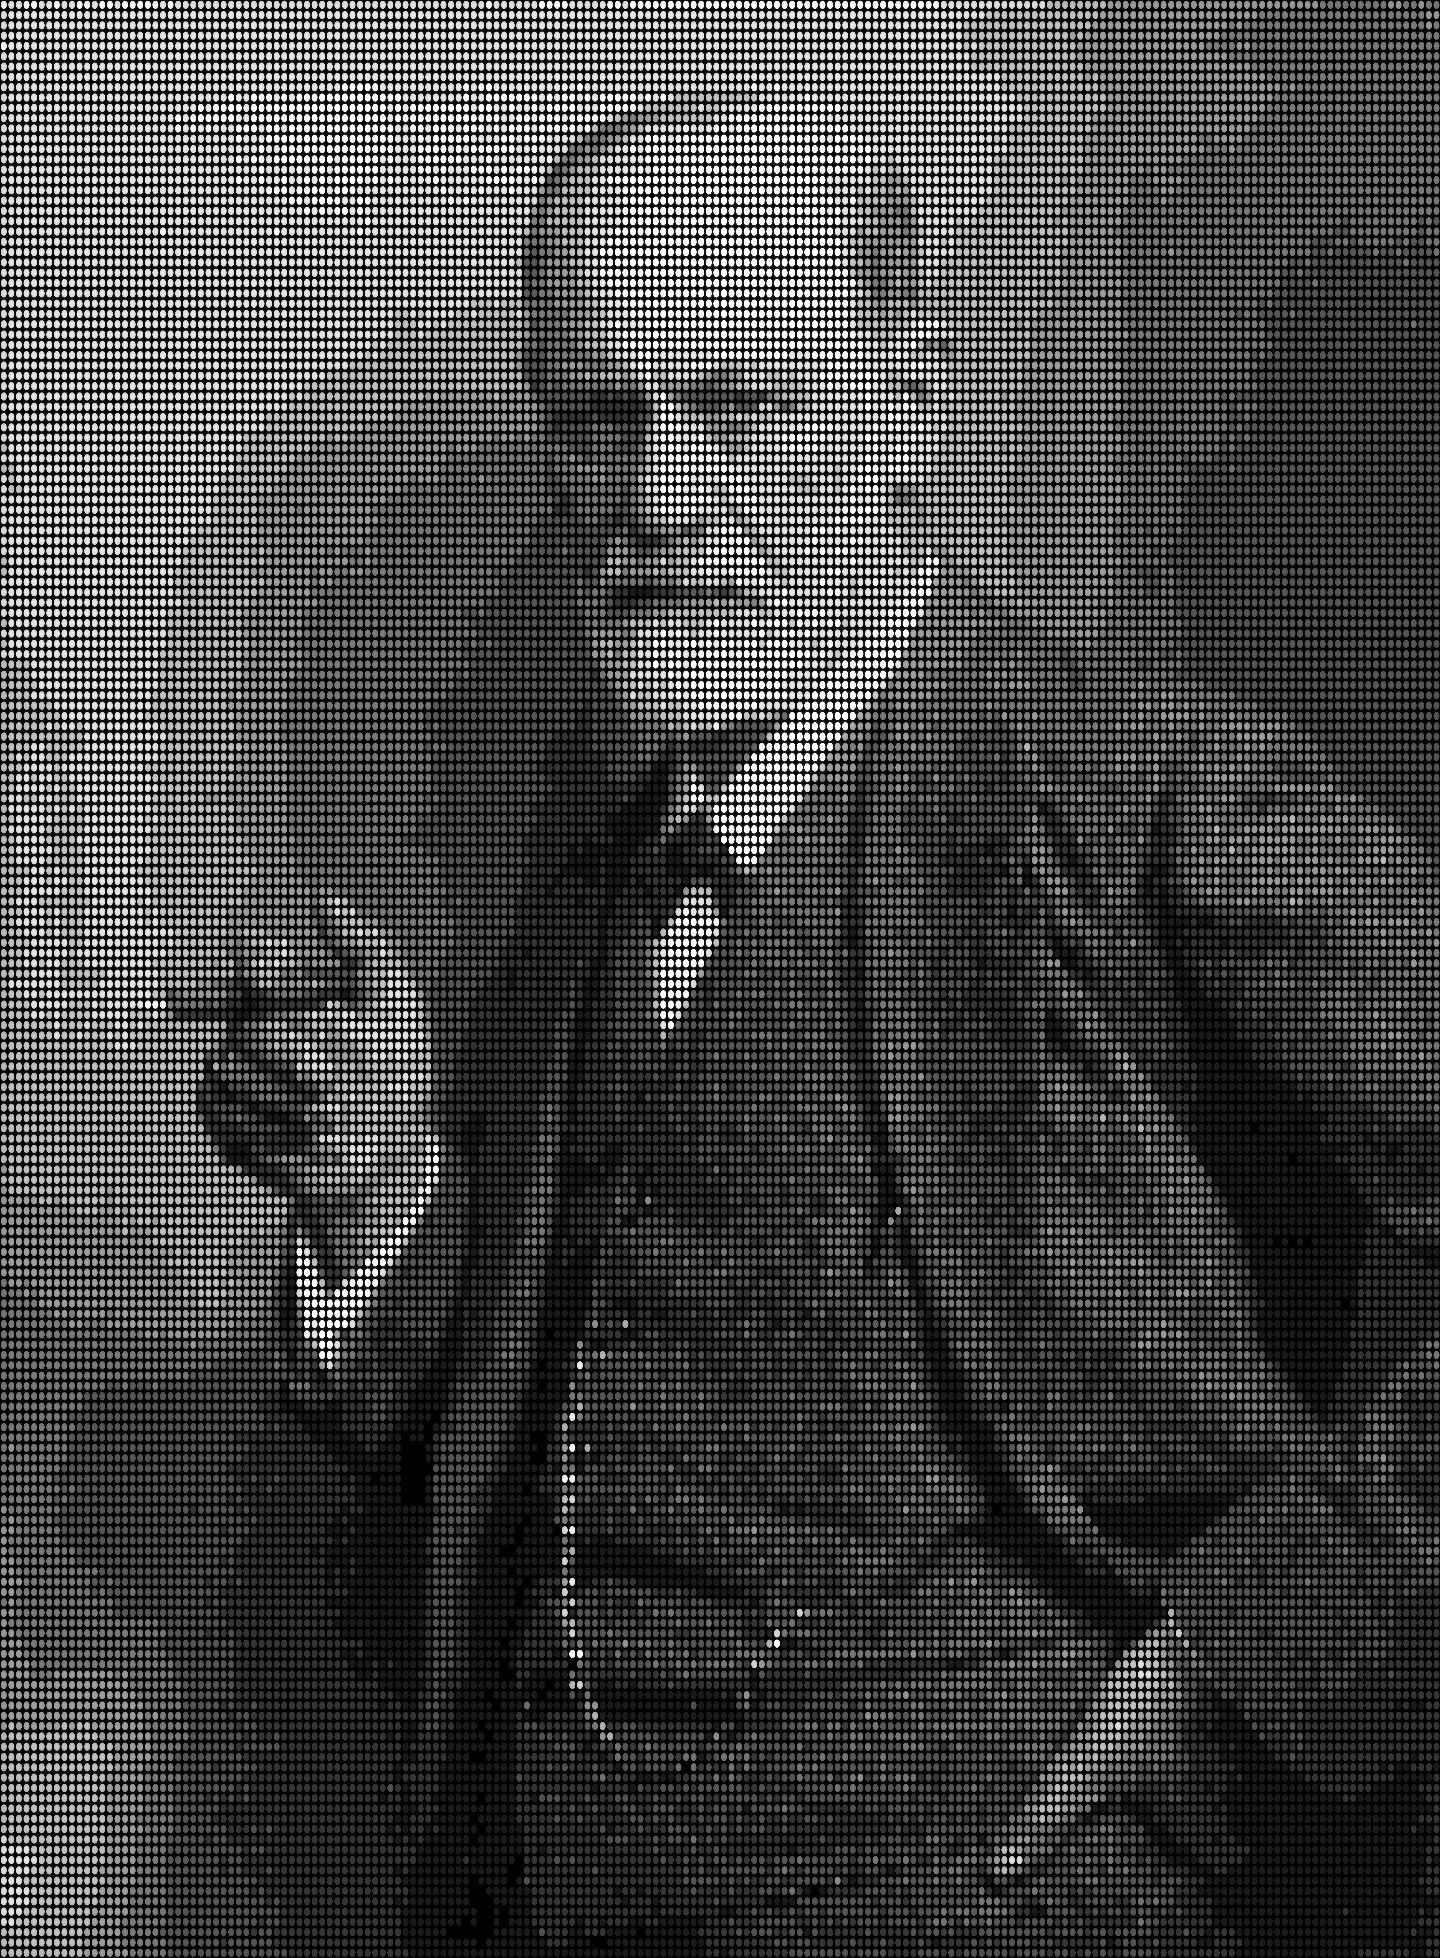 Sigmund Freud (1856-1939), who believed social hierarchy and norms were a major source of mental illness.